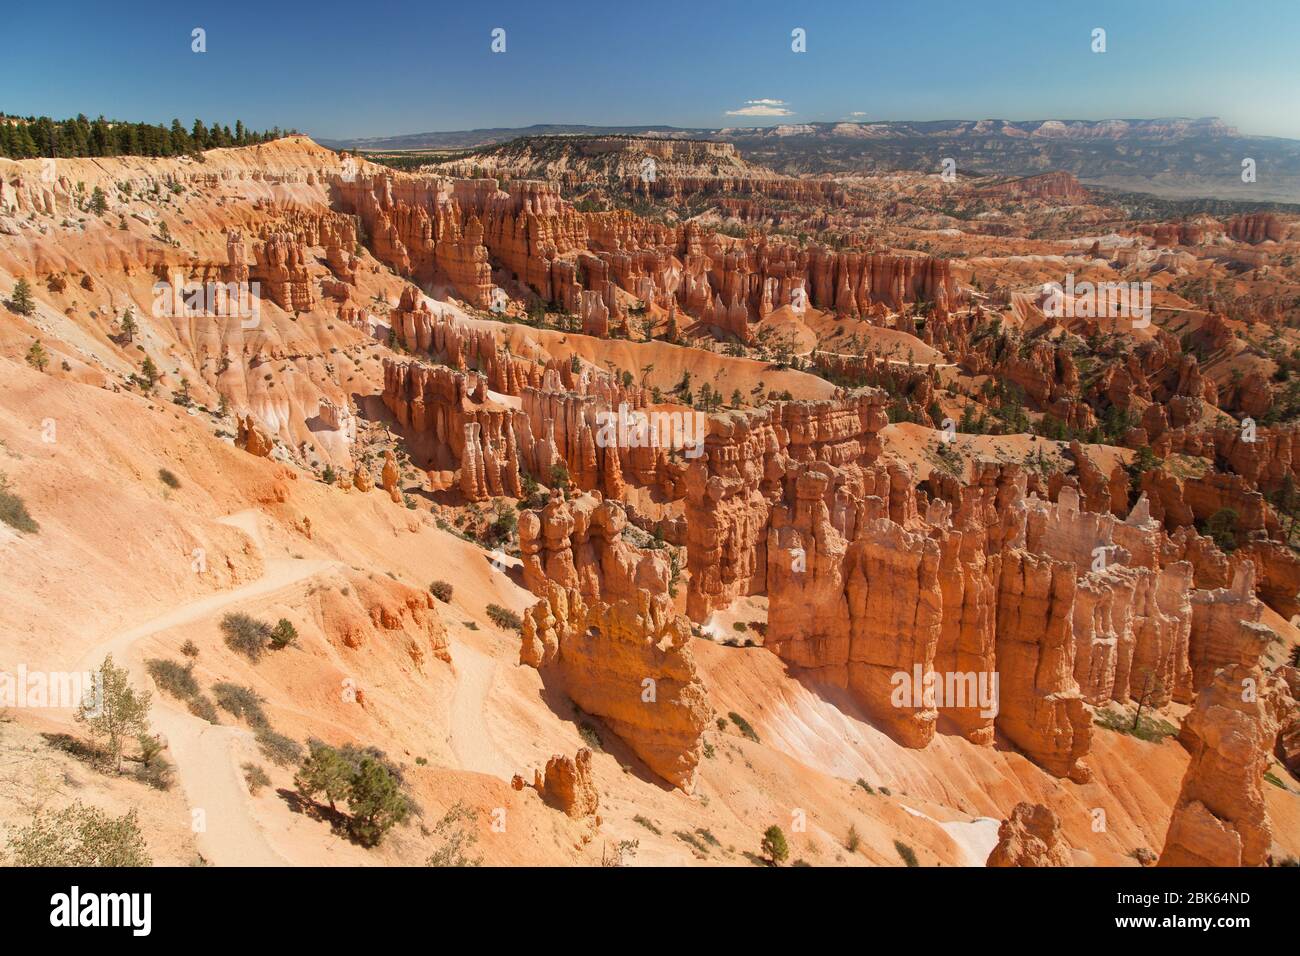 Bryce Canyon from Sunset Point, Bryce Canyon National Park, Utah, United States. Stock Photo